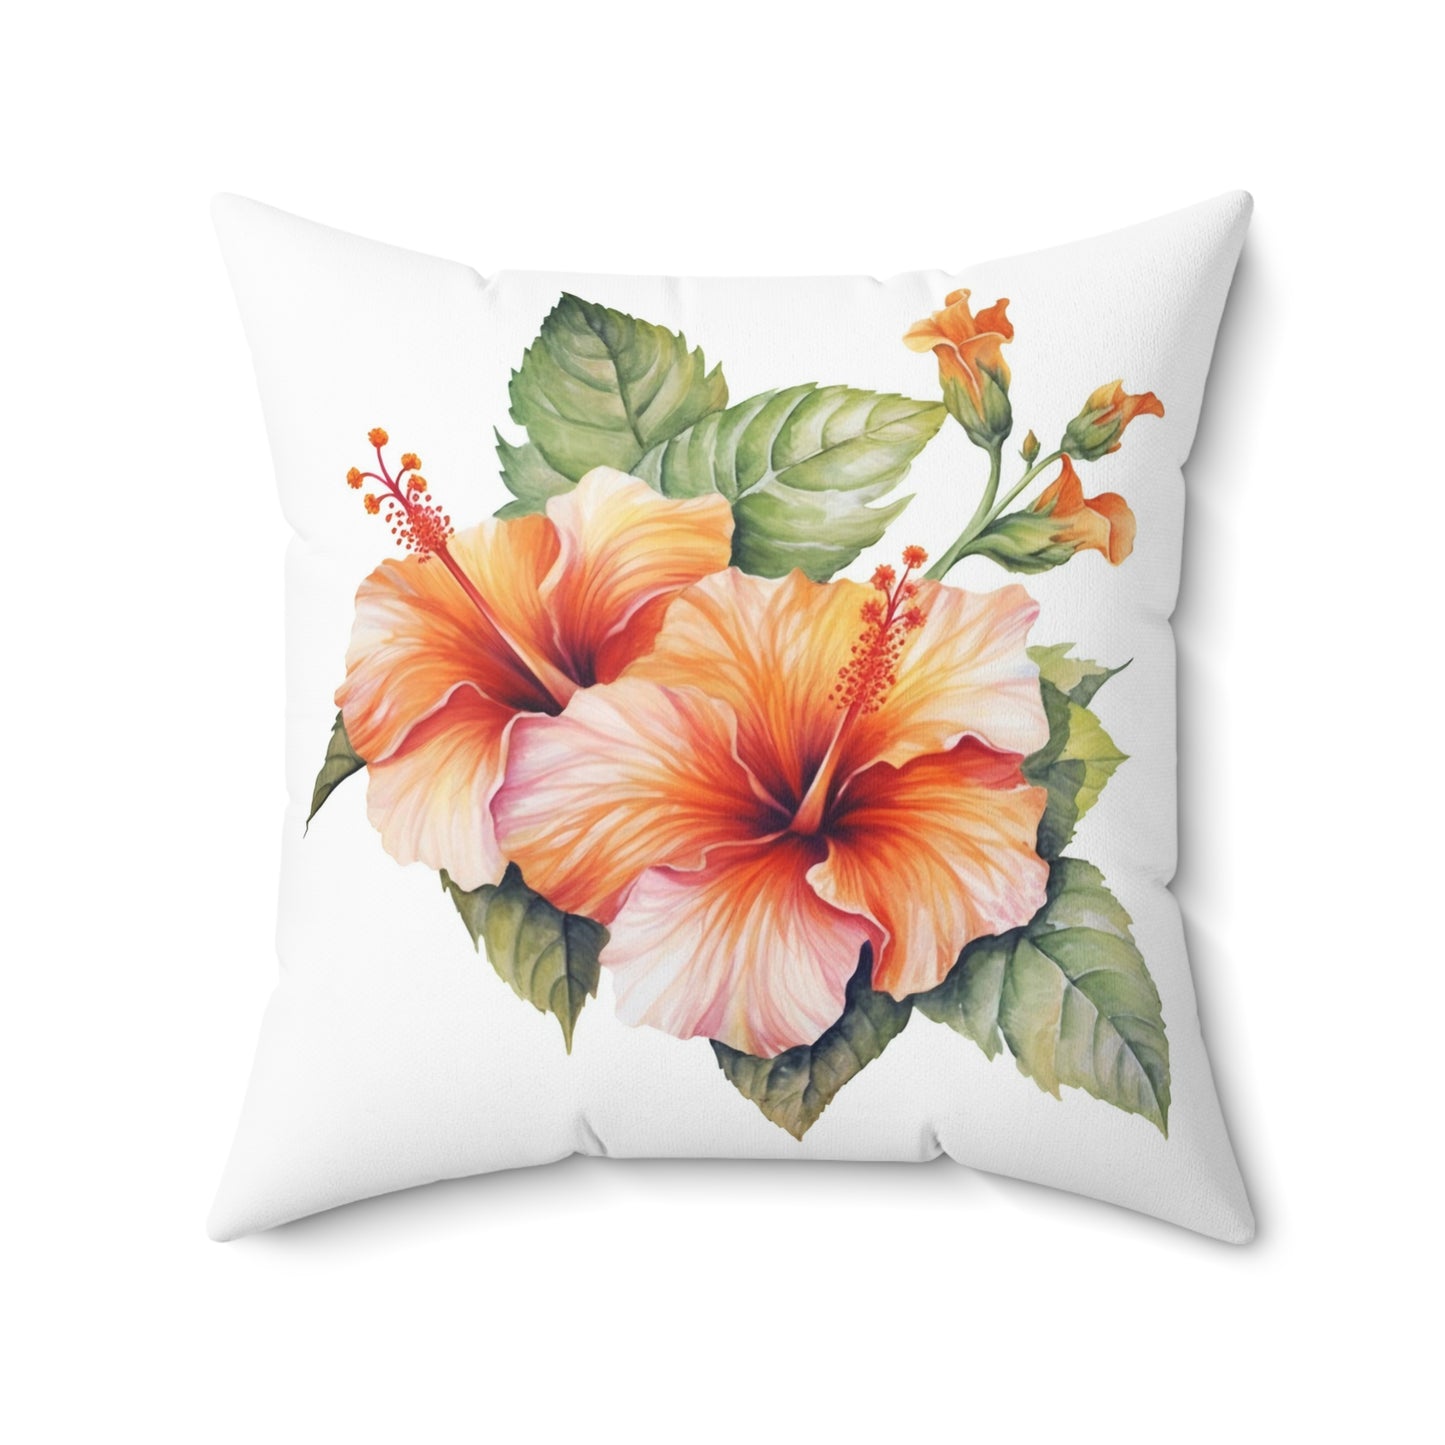 Hibiscus Throw Pillow, Watercolor Hibiscus Decorative Pillow, Square Flower Cushion, Double Sided Orange Accent Pillow, Concealed Zipper